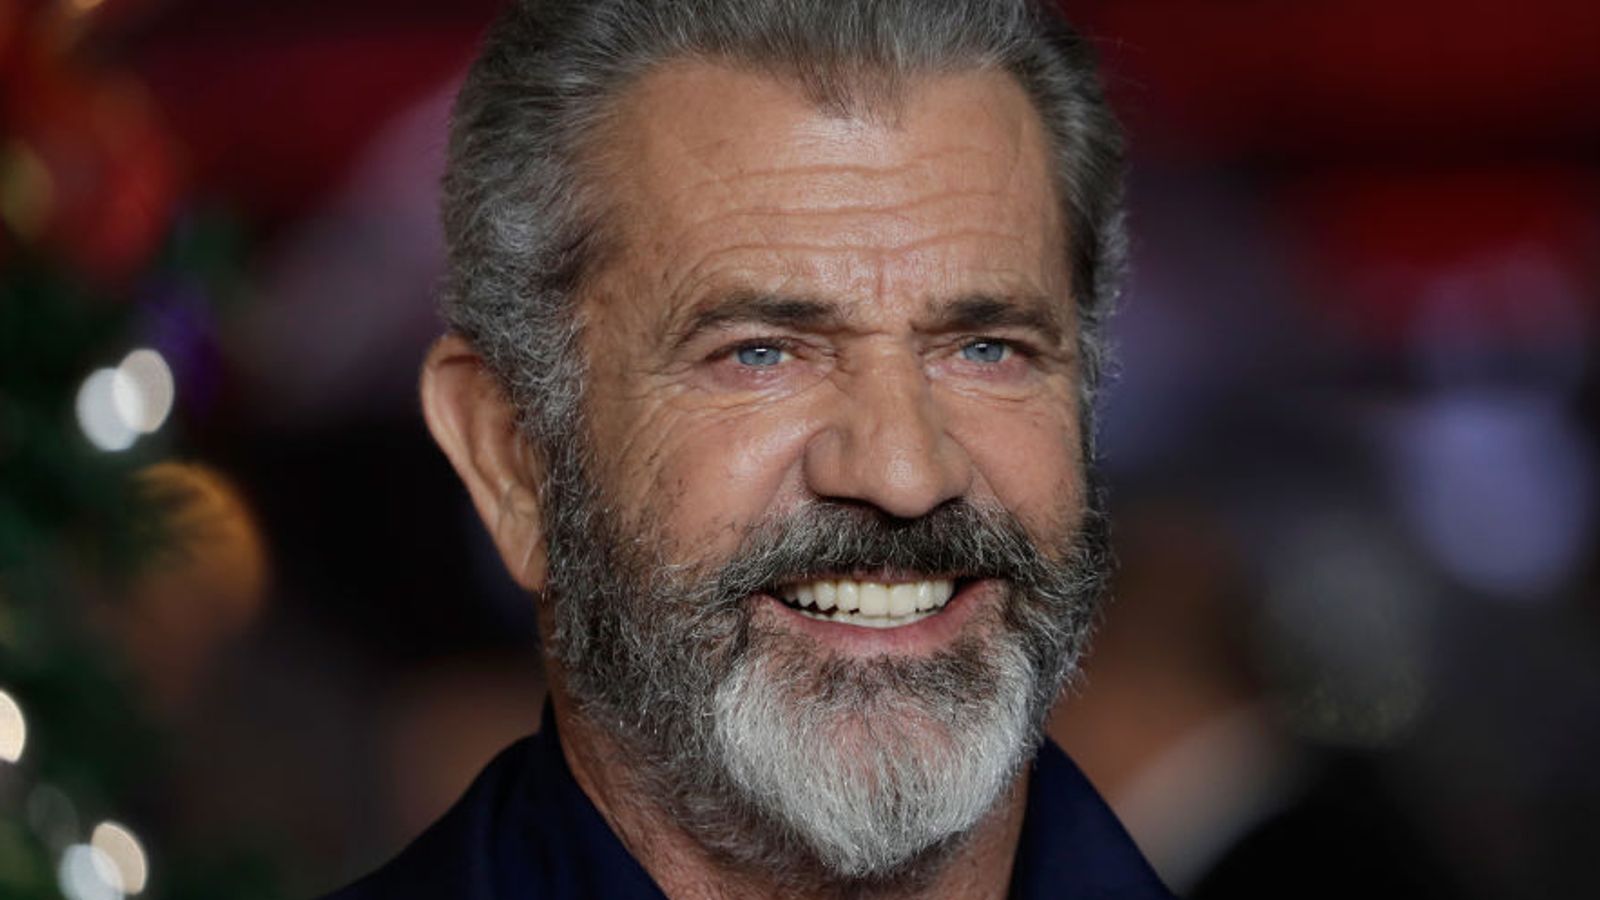 https://news.sky.com/story/coronavirus-mel-gibson-was-treated-in-hospital-after-contracting-covid-19-12035121